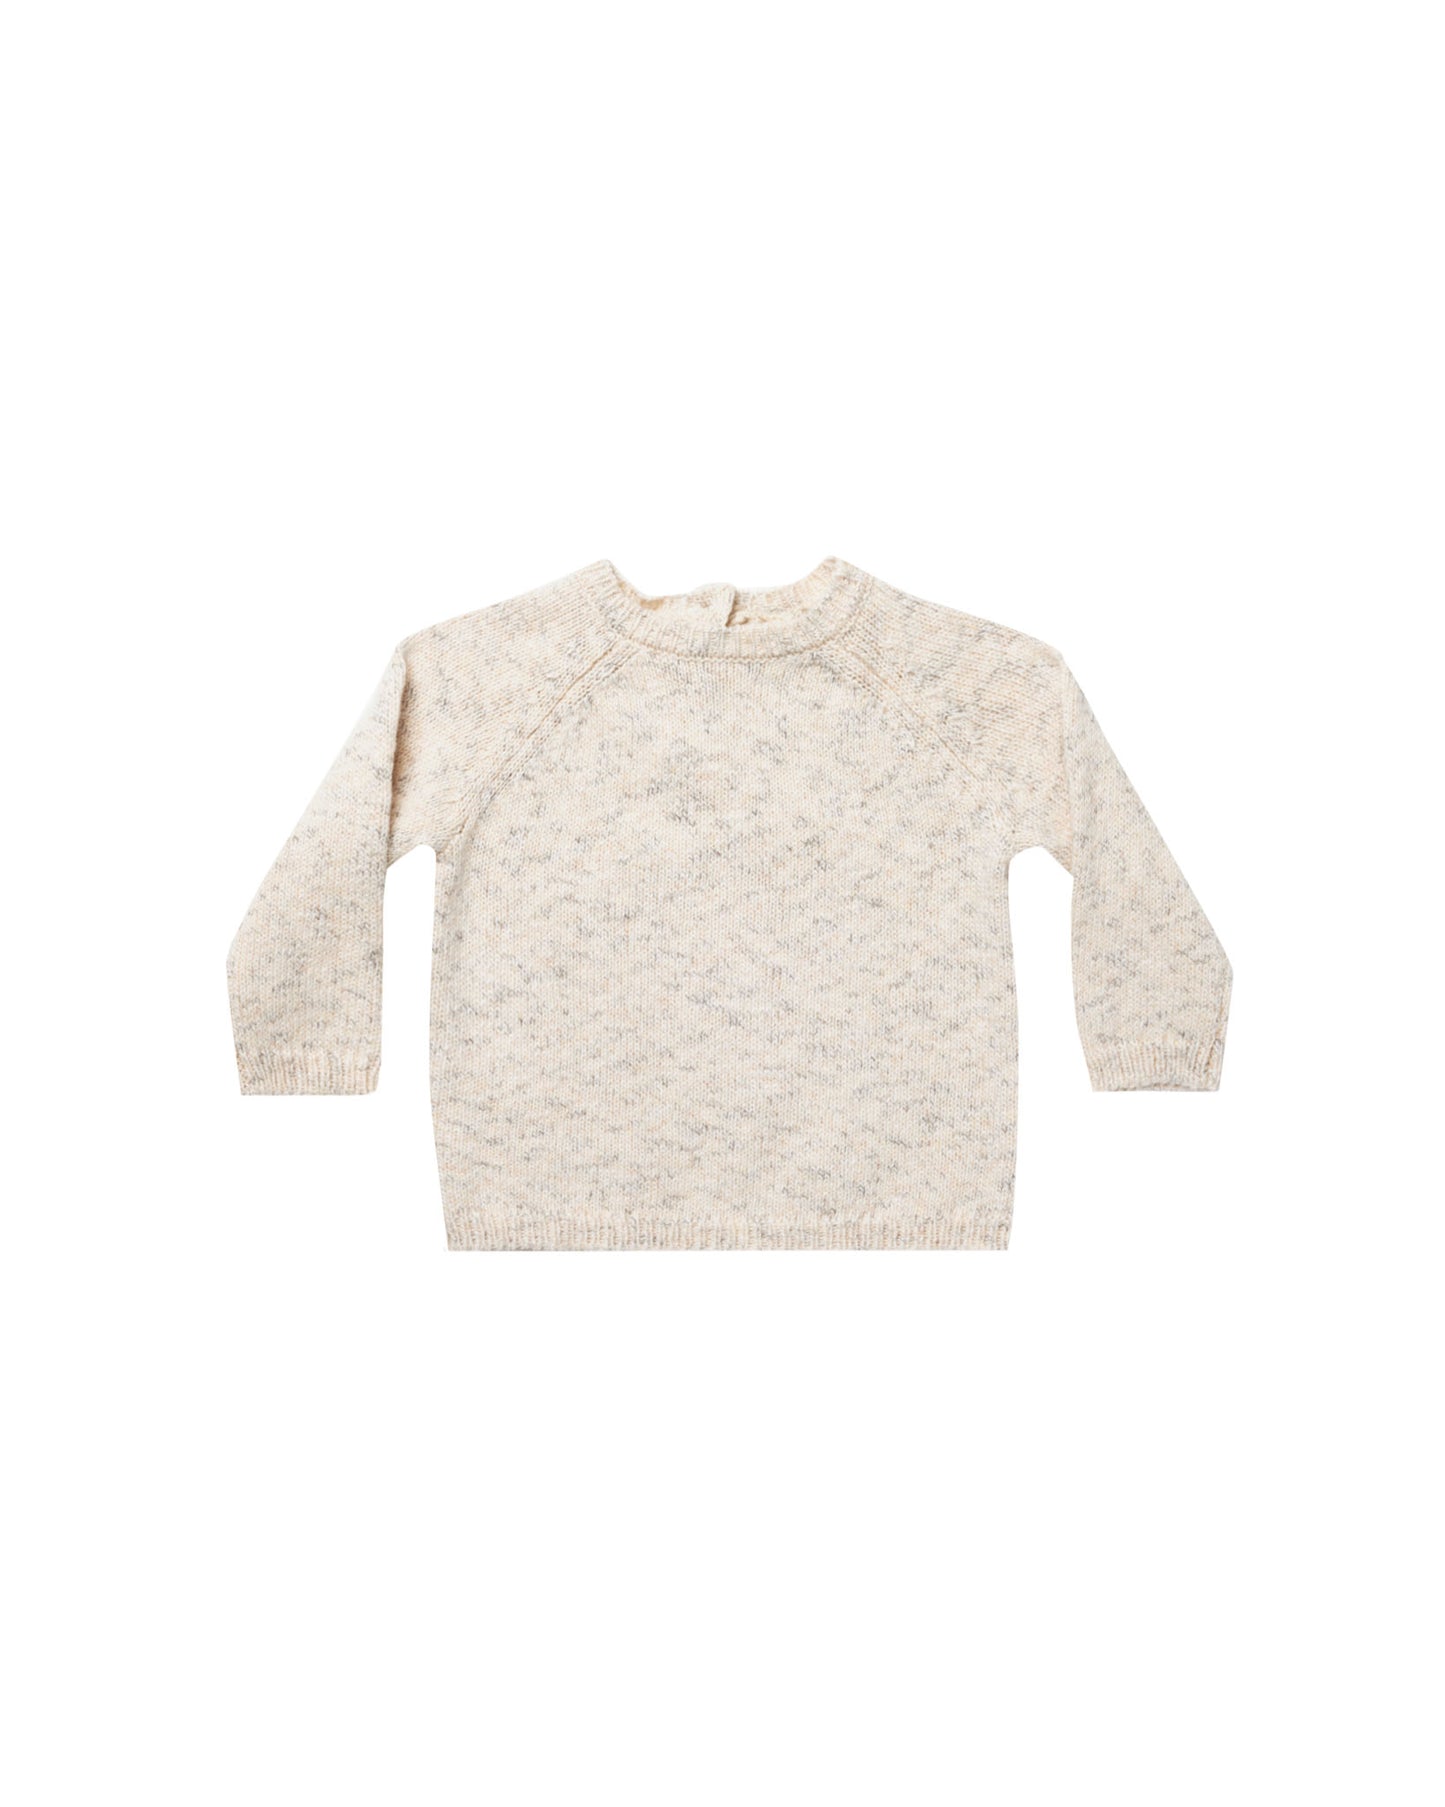 Quincy Mae Speckled Knit Sweater Natural